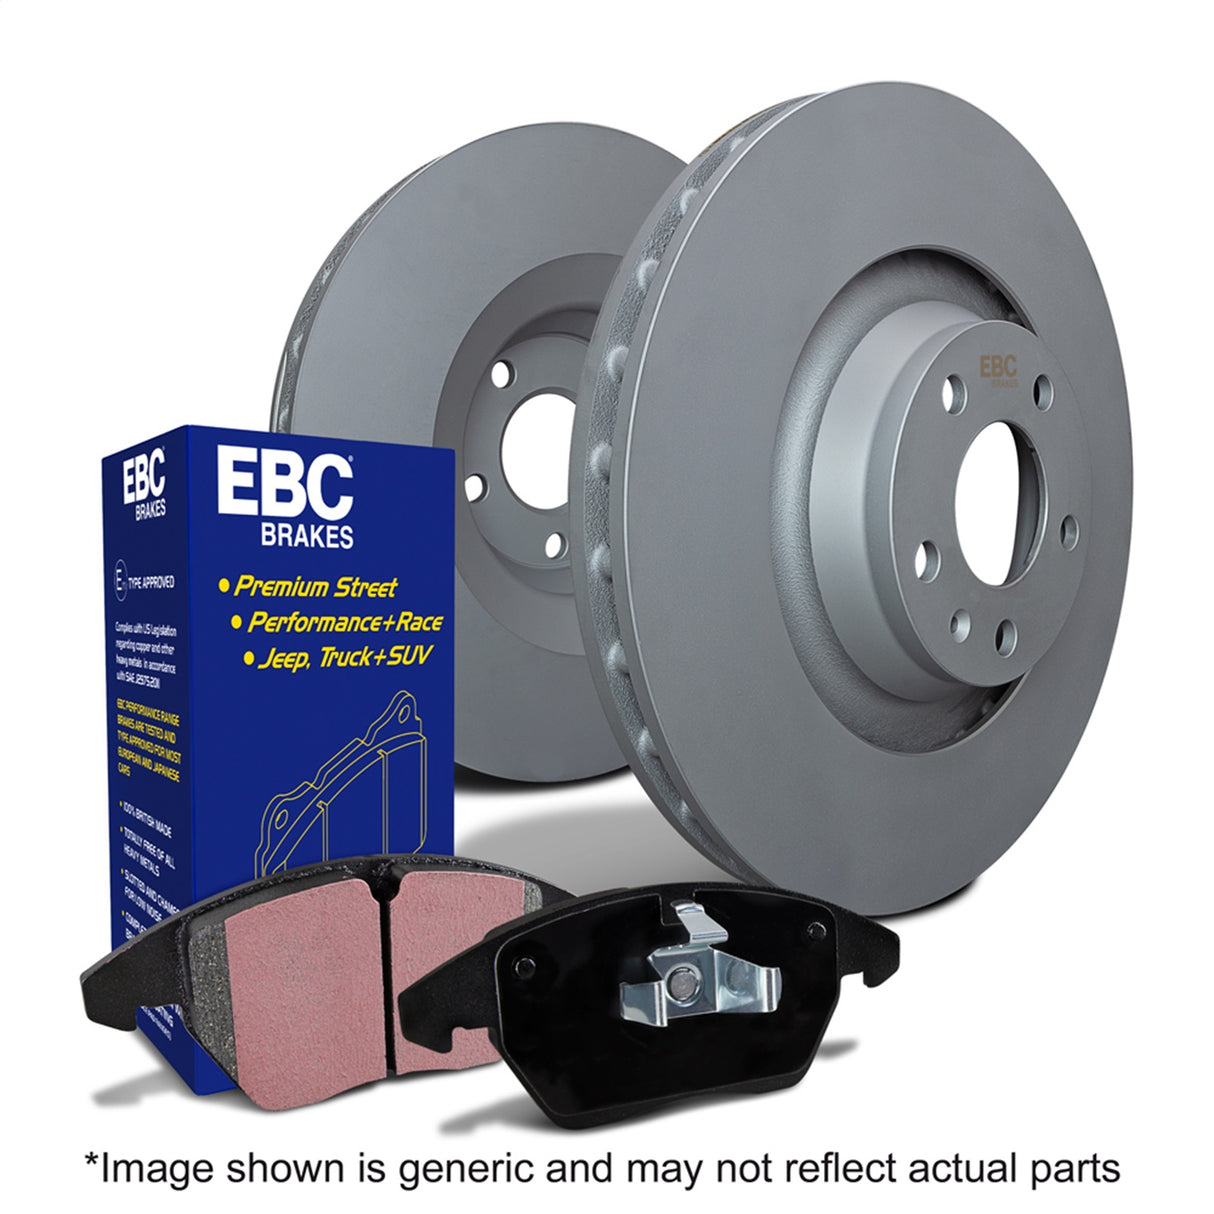 EBC Brakes S20K1244 S20 Kits Ultimax and Plain Rotors - Roam Overland Outfitters